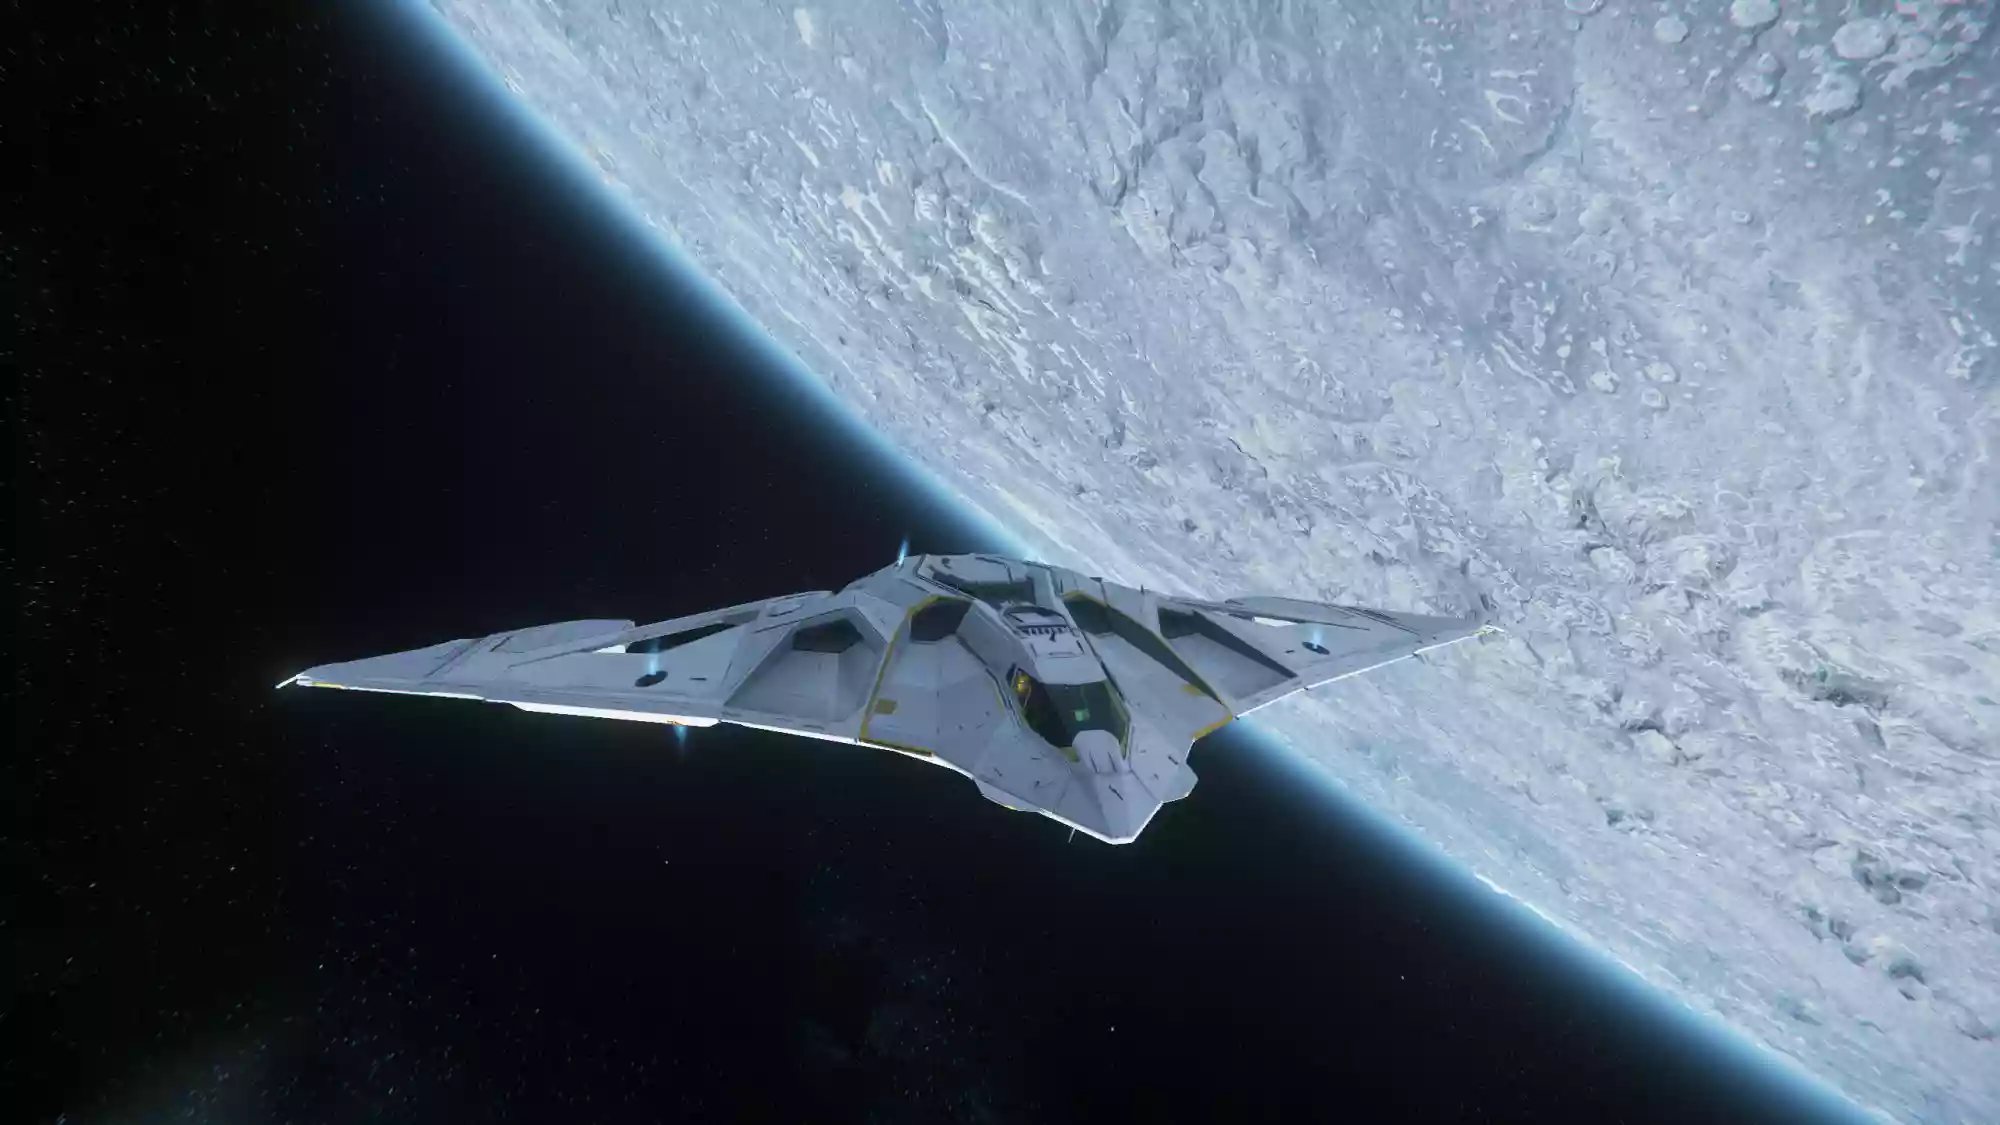 Aegis Eclipse bomber in white pair orbiting a moon.